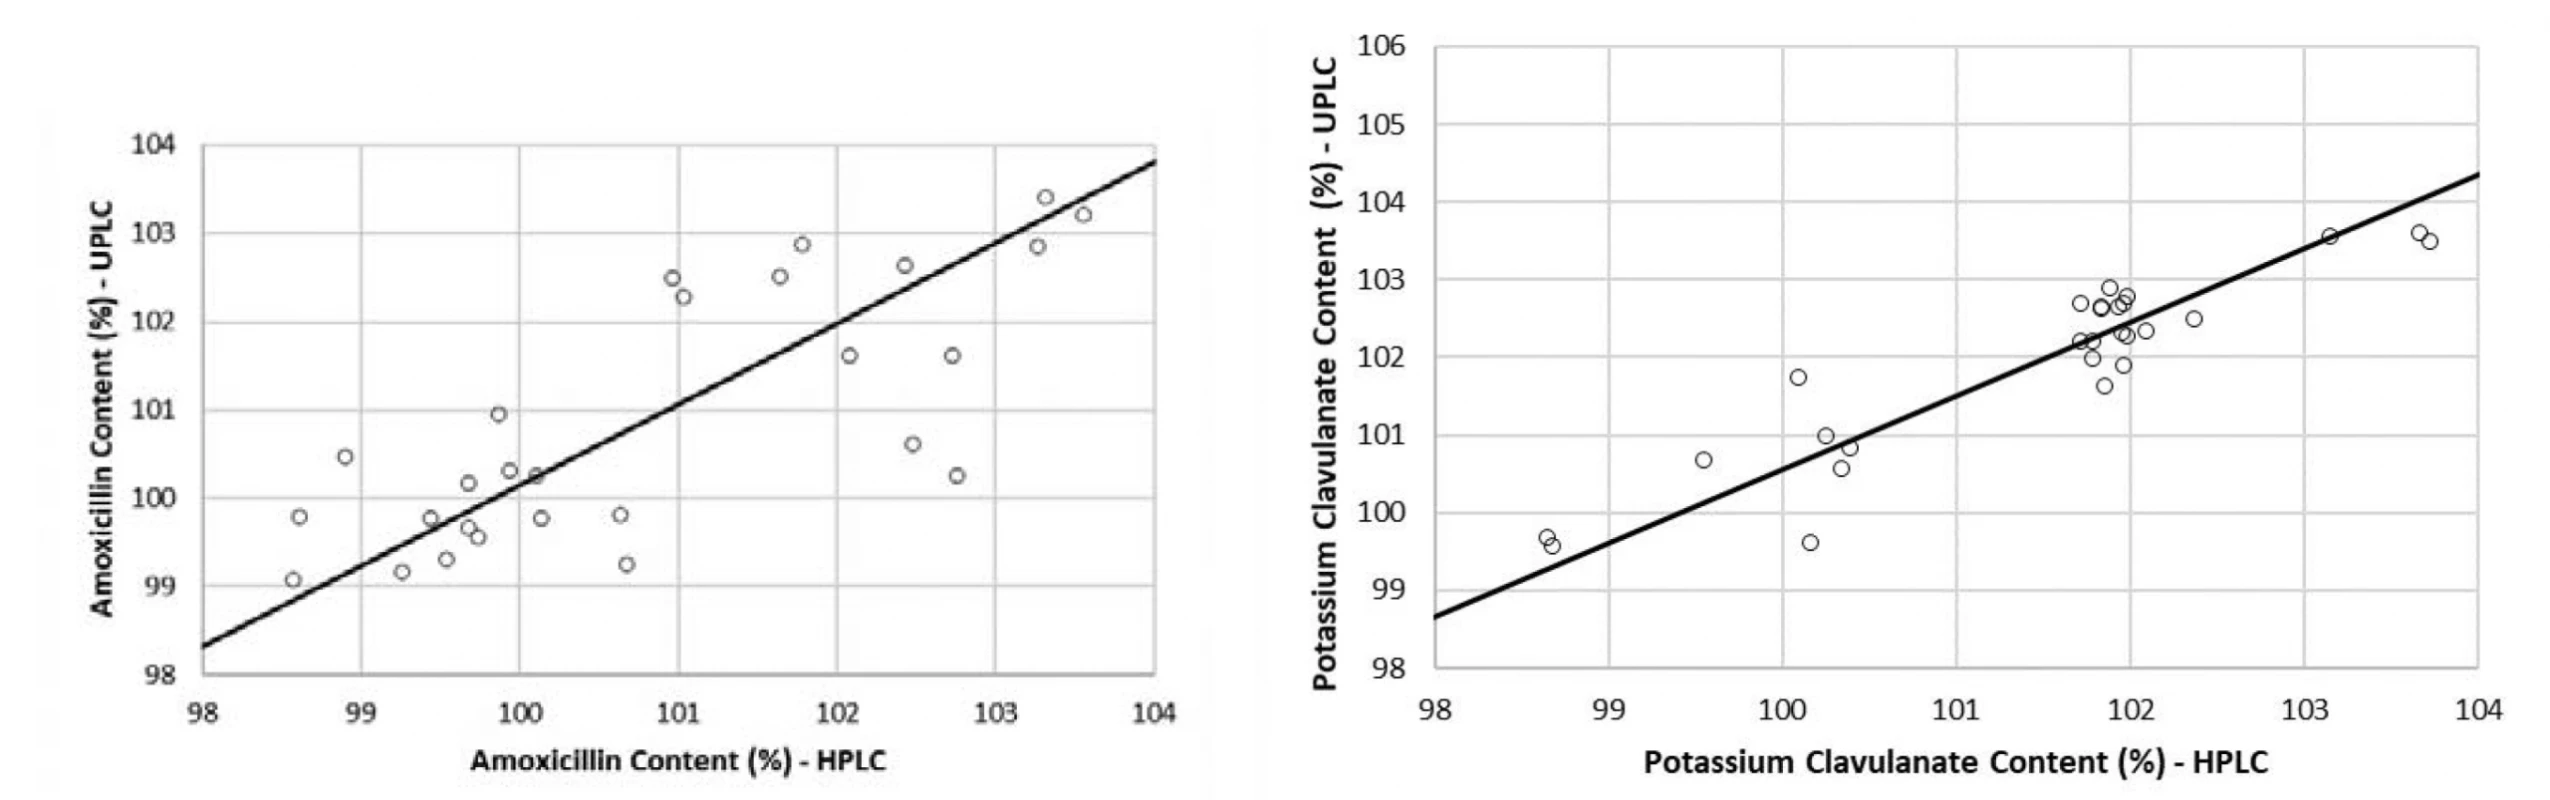 Regression plots of the comparison between HPLC and UPLC for amoxicillin (a) and potassium clavulanate (a) by the
Passing-Bablok method